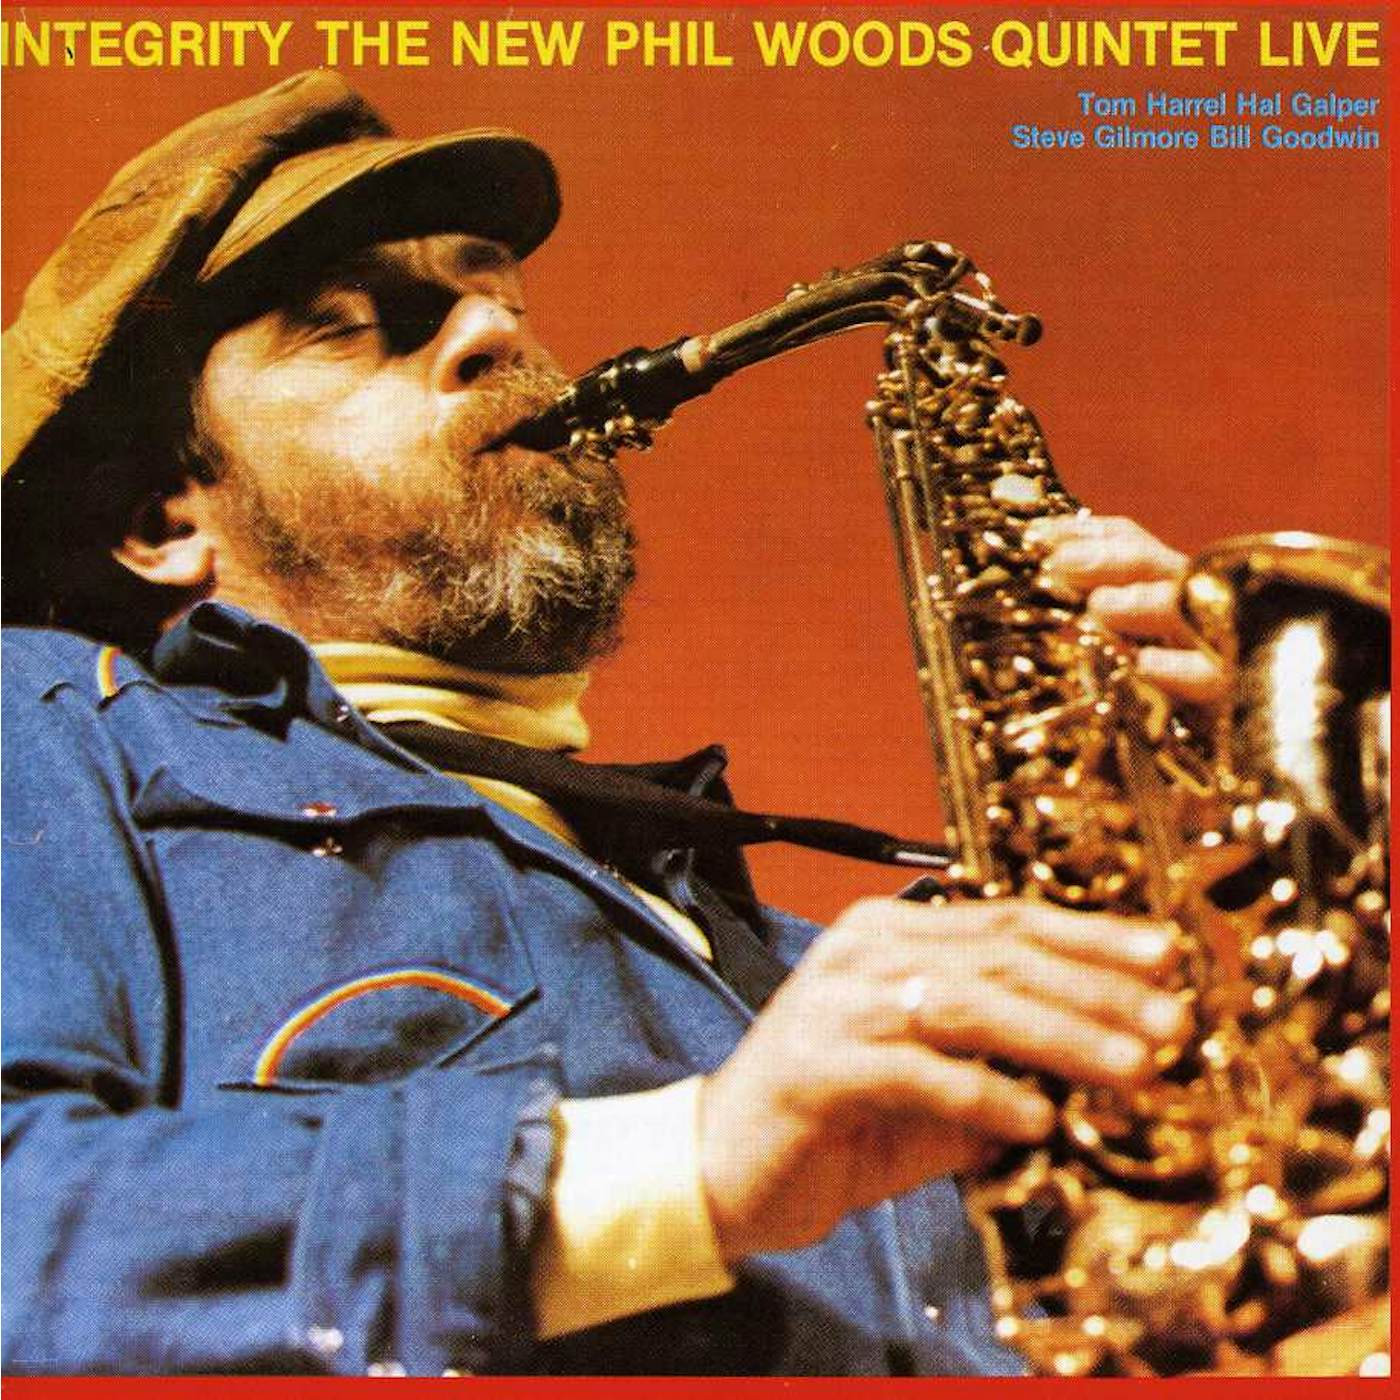 Phil Woods INTEGRITY CD